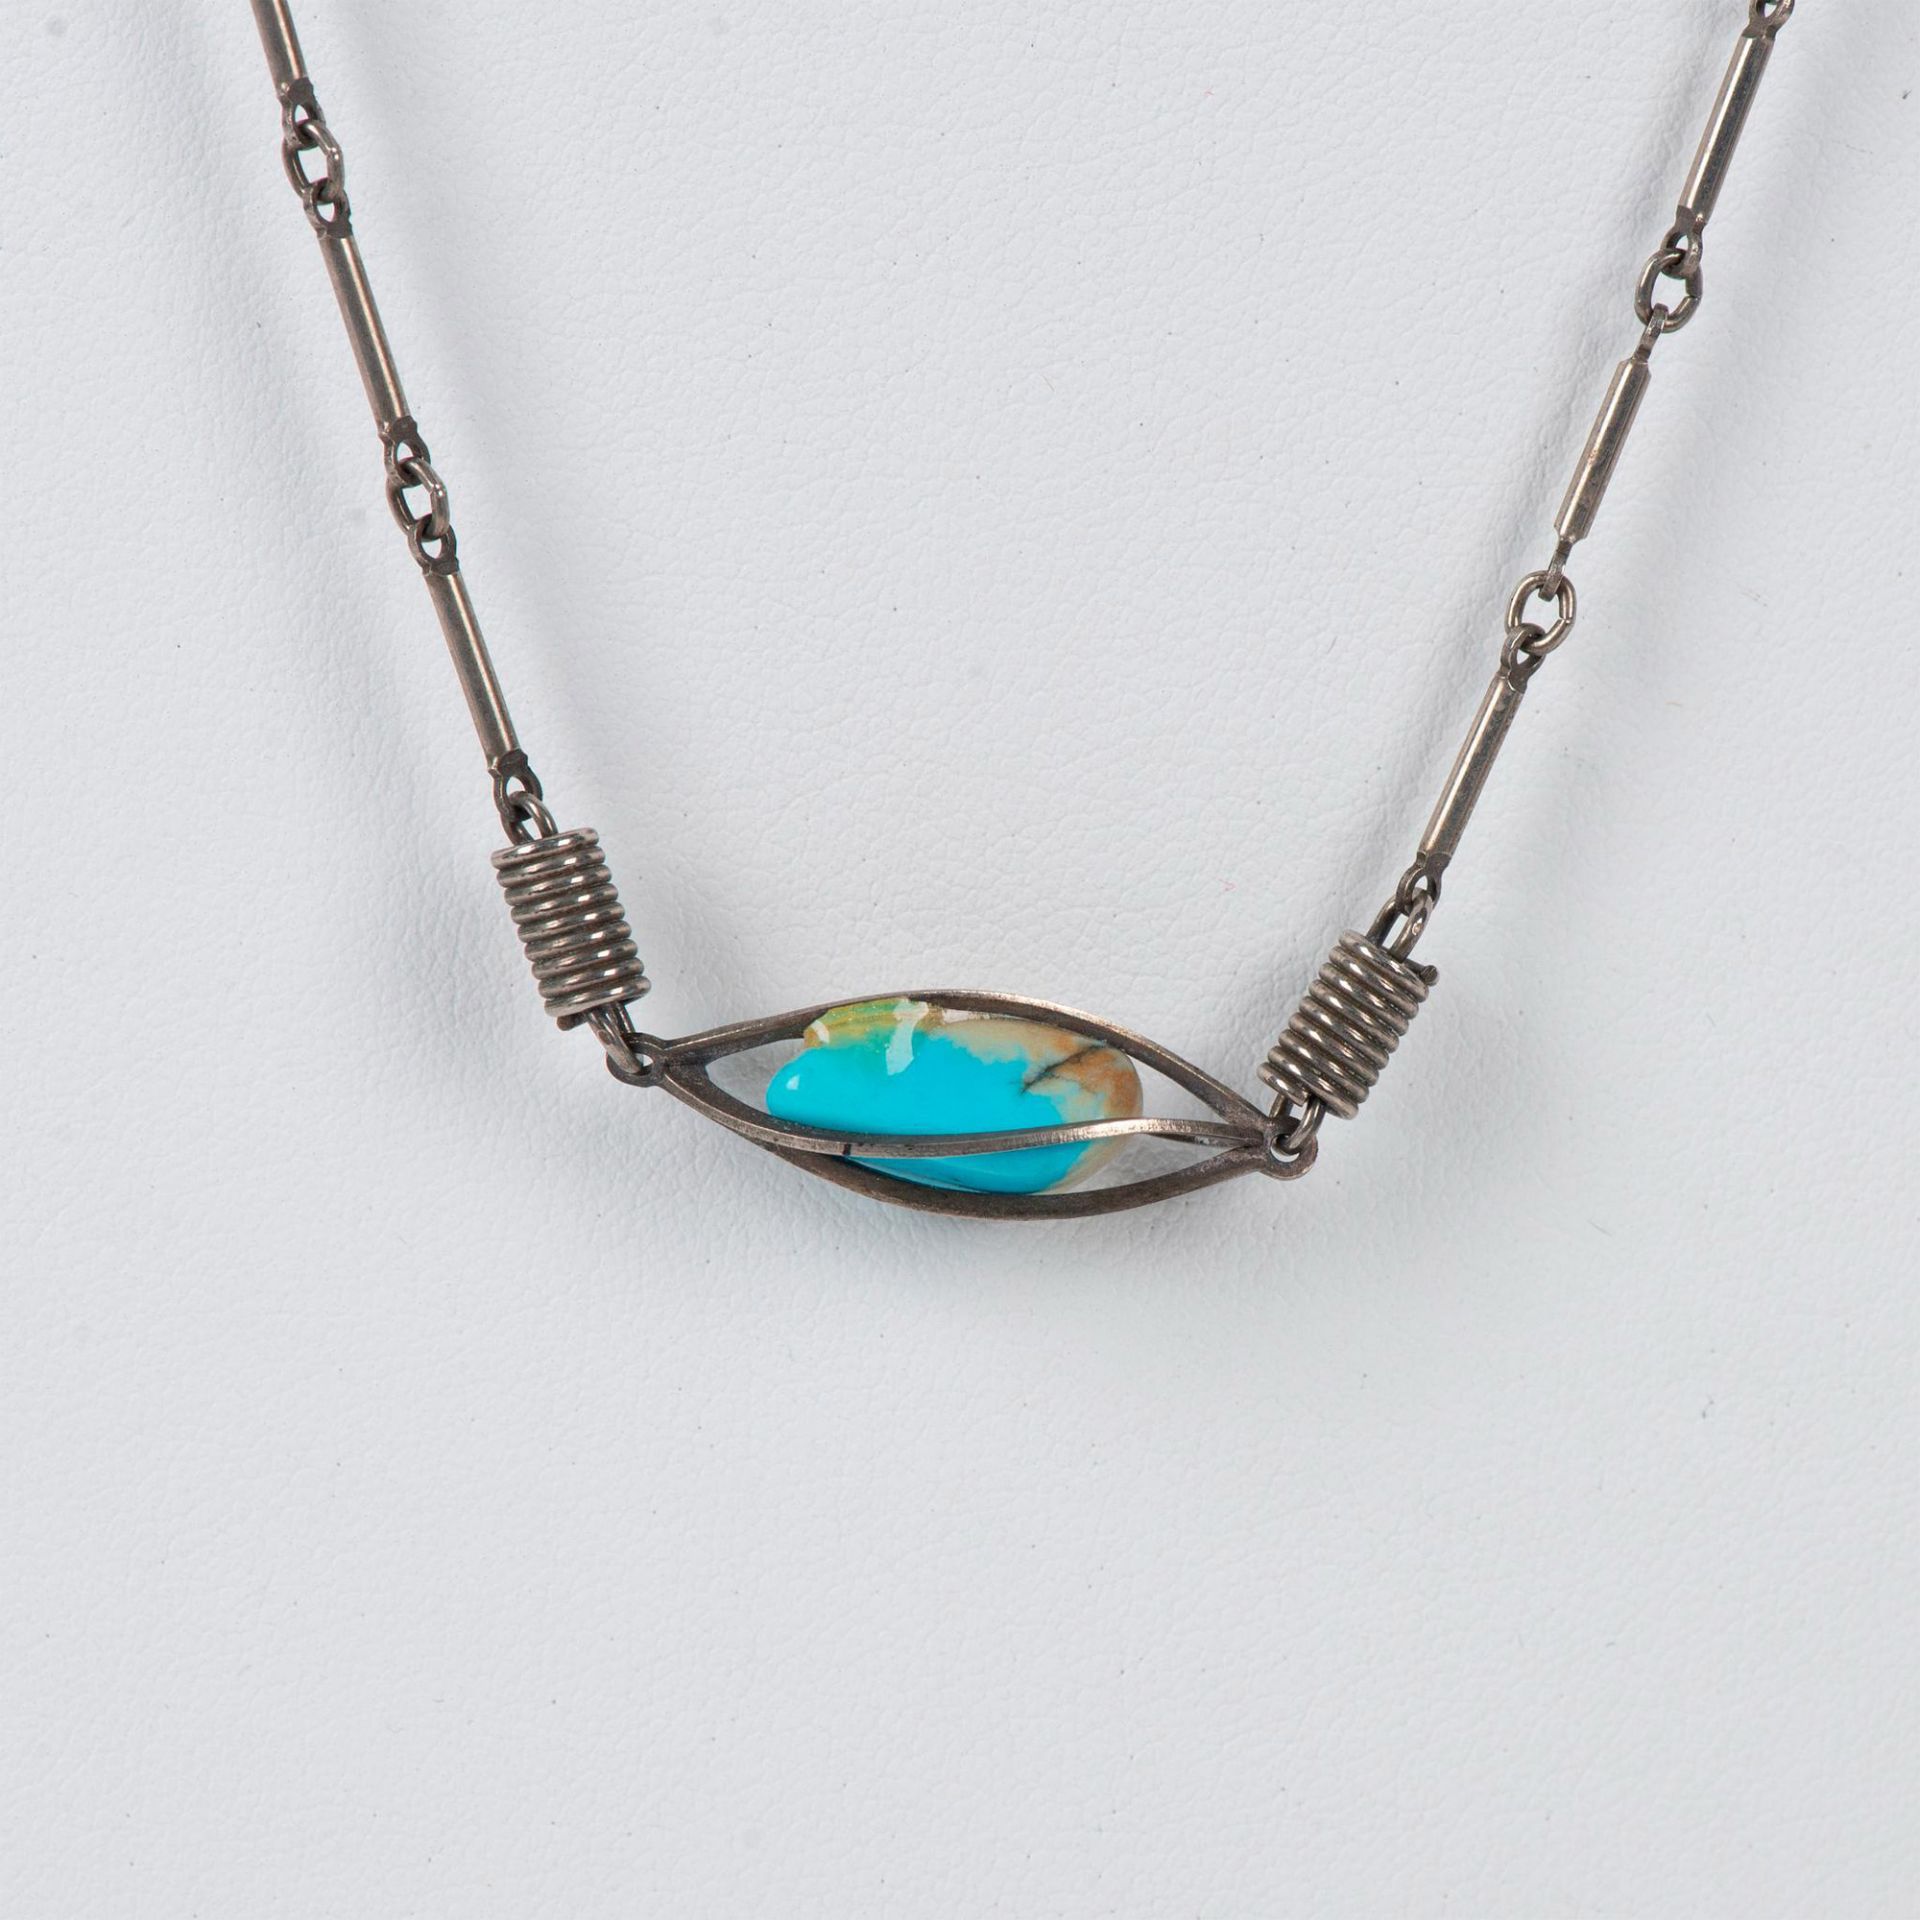 Silver Metal and Turquoise Necklace - Image 2 of 3